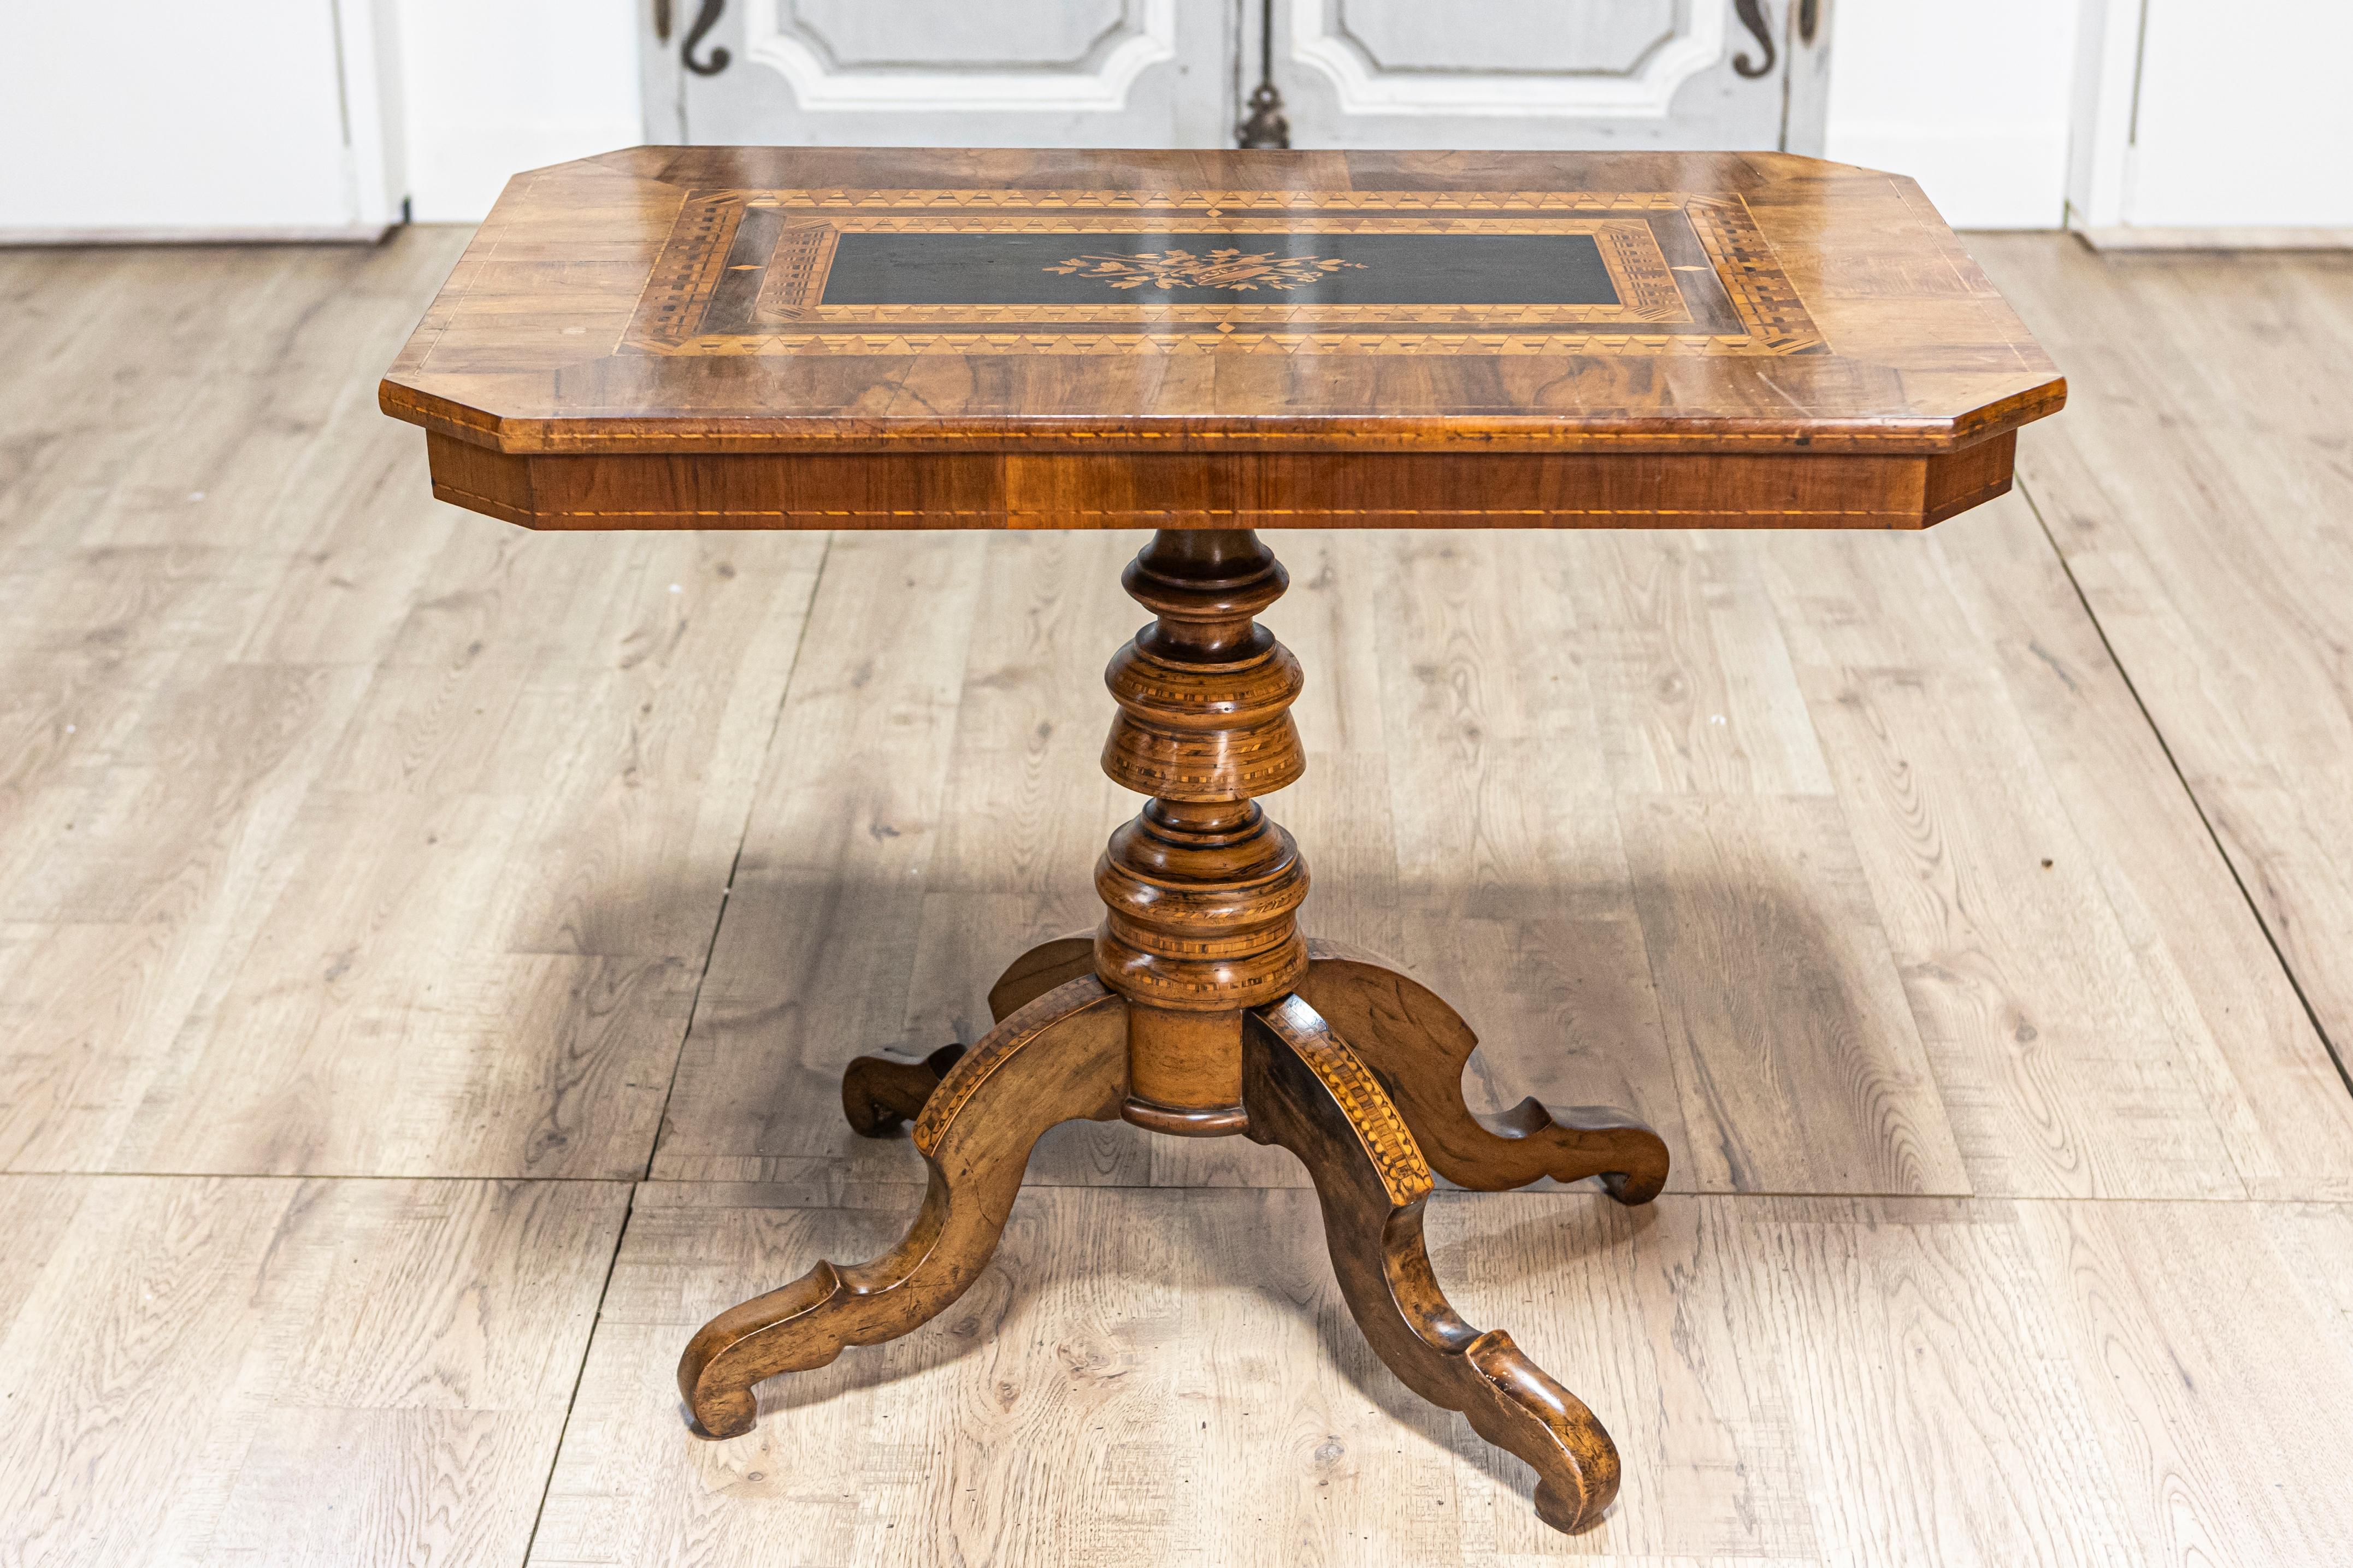 Italian 19th Century Walnut and Mahogany Center Table with Floral Marquetry For Sale 9